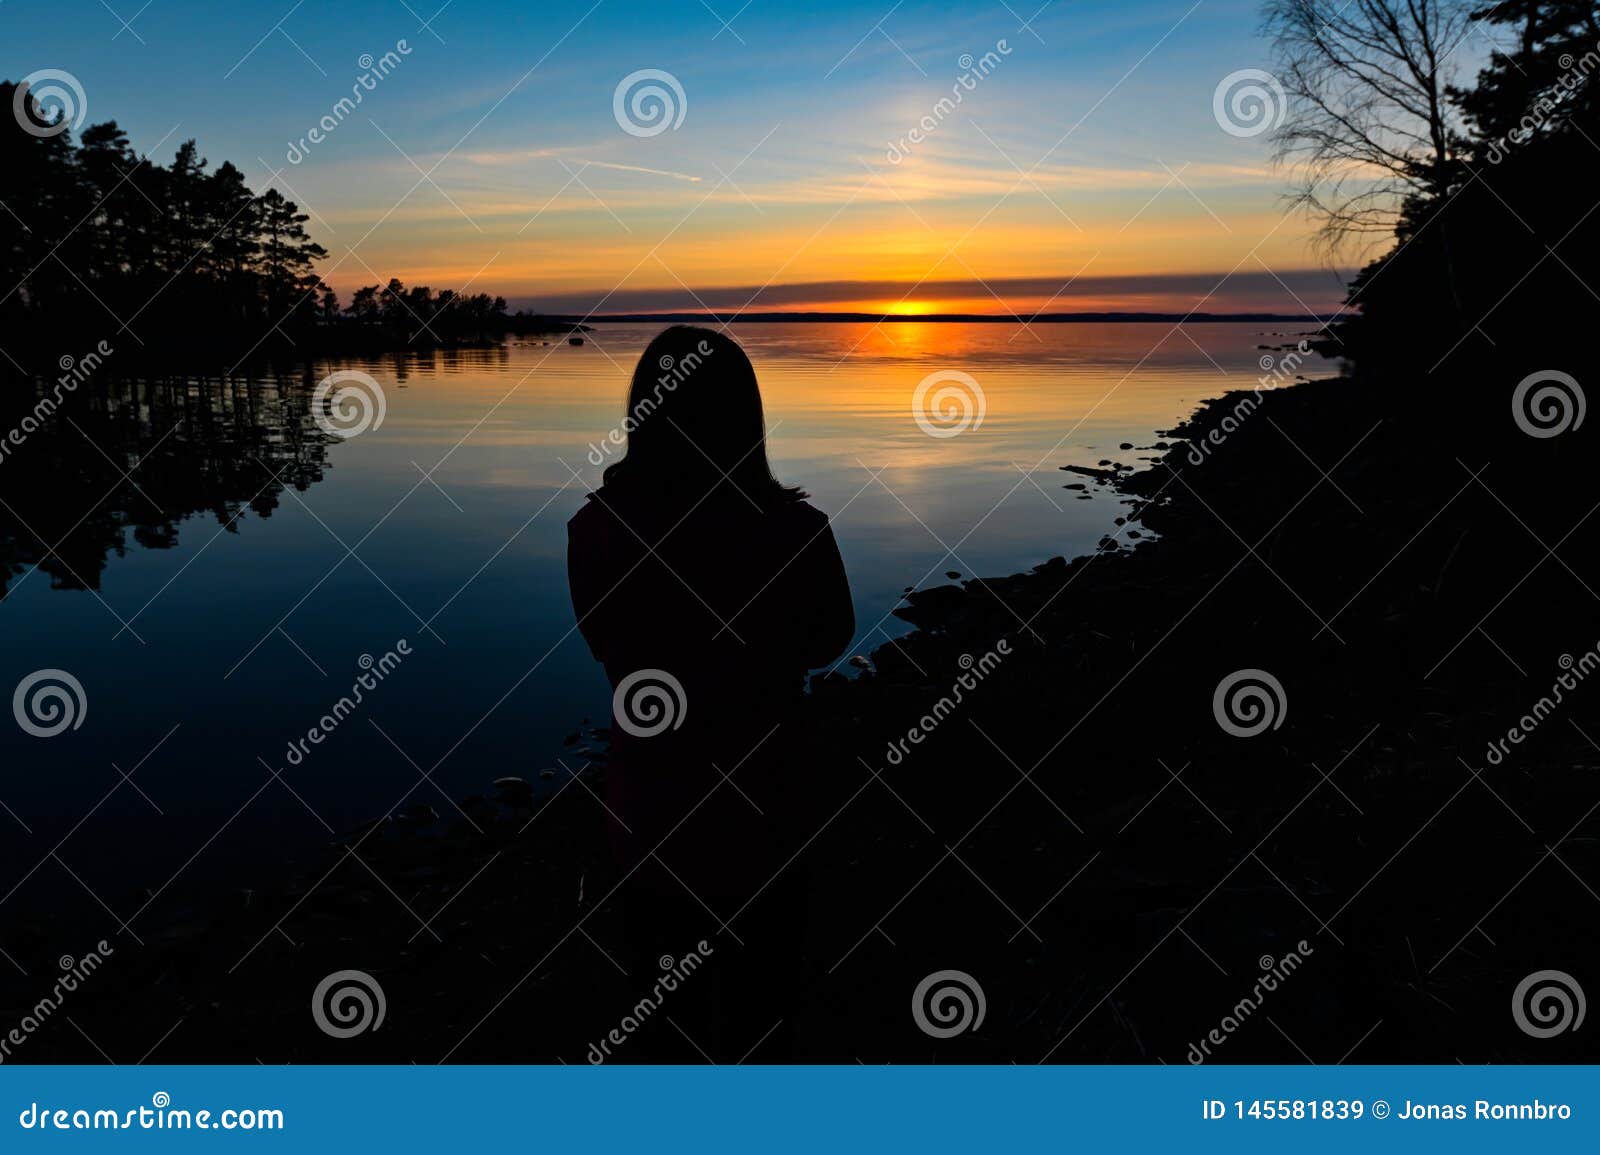 siluette of a young person standing infront of a sunset